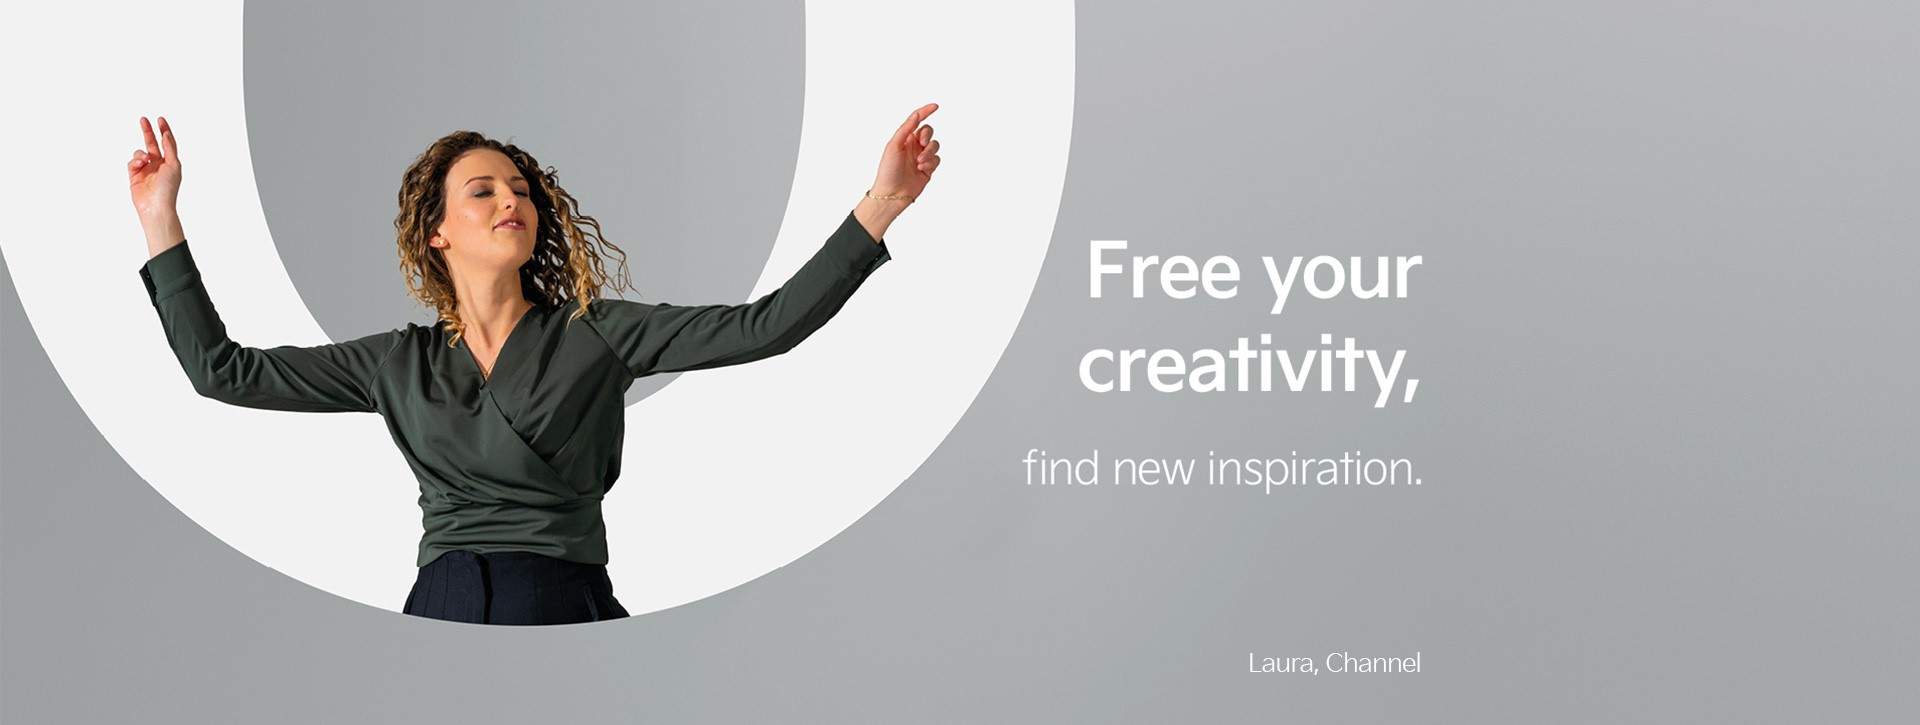 Culture - Free your creativity